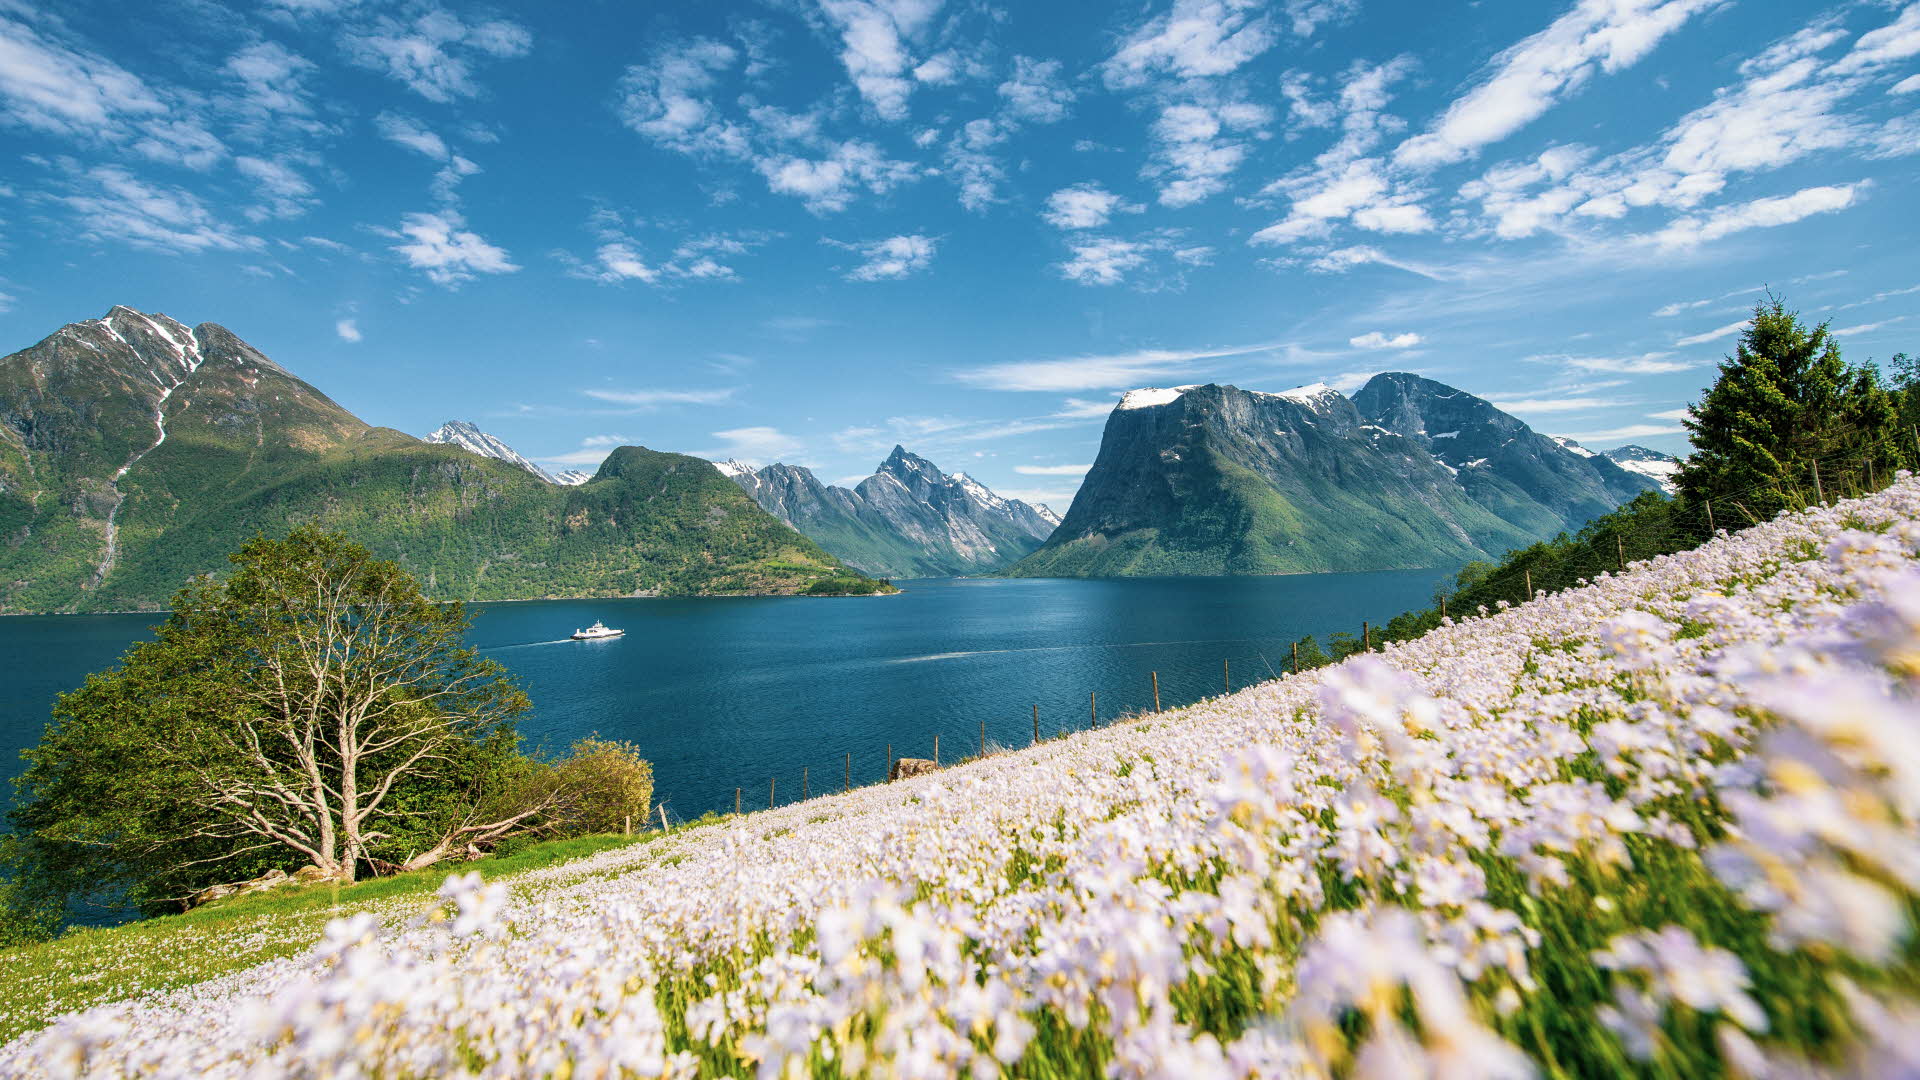 Wild rugged landscape with high snow-capped mountains and lush green hills that dive into the green-bluish Hjorundfjord